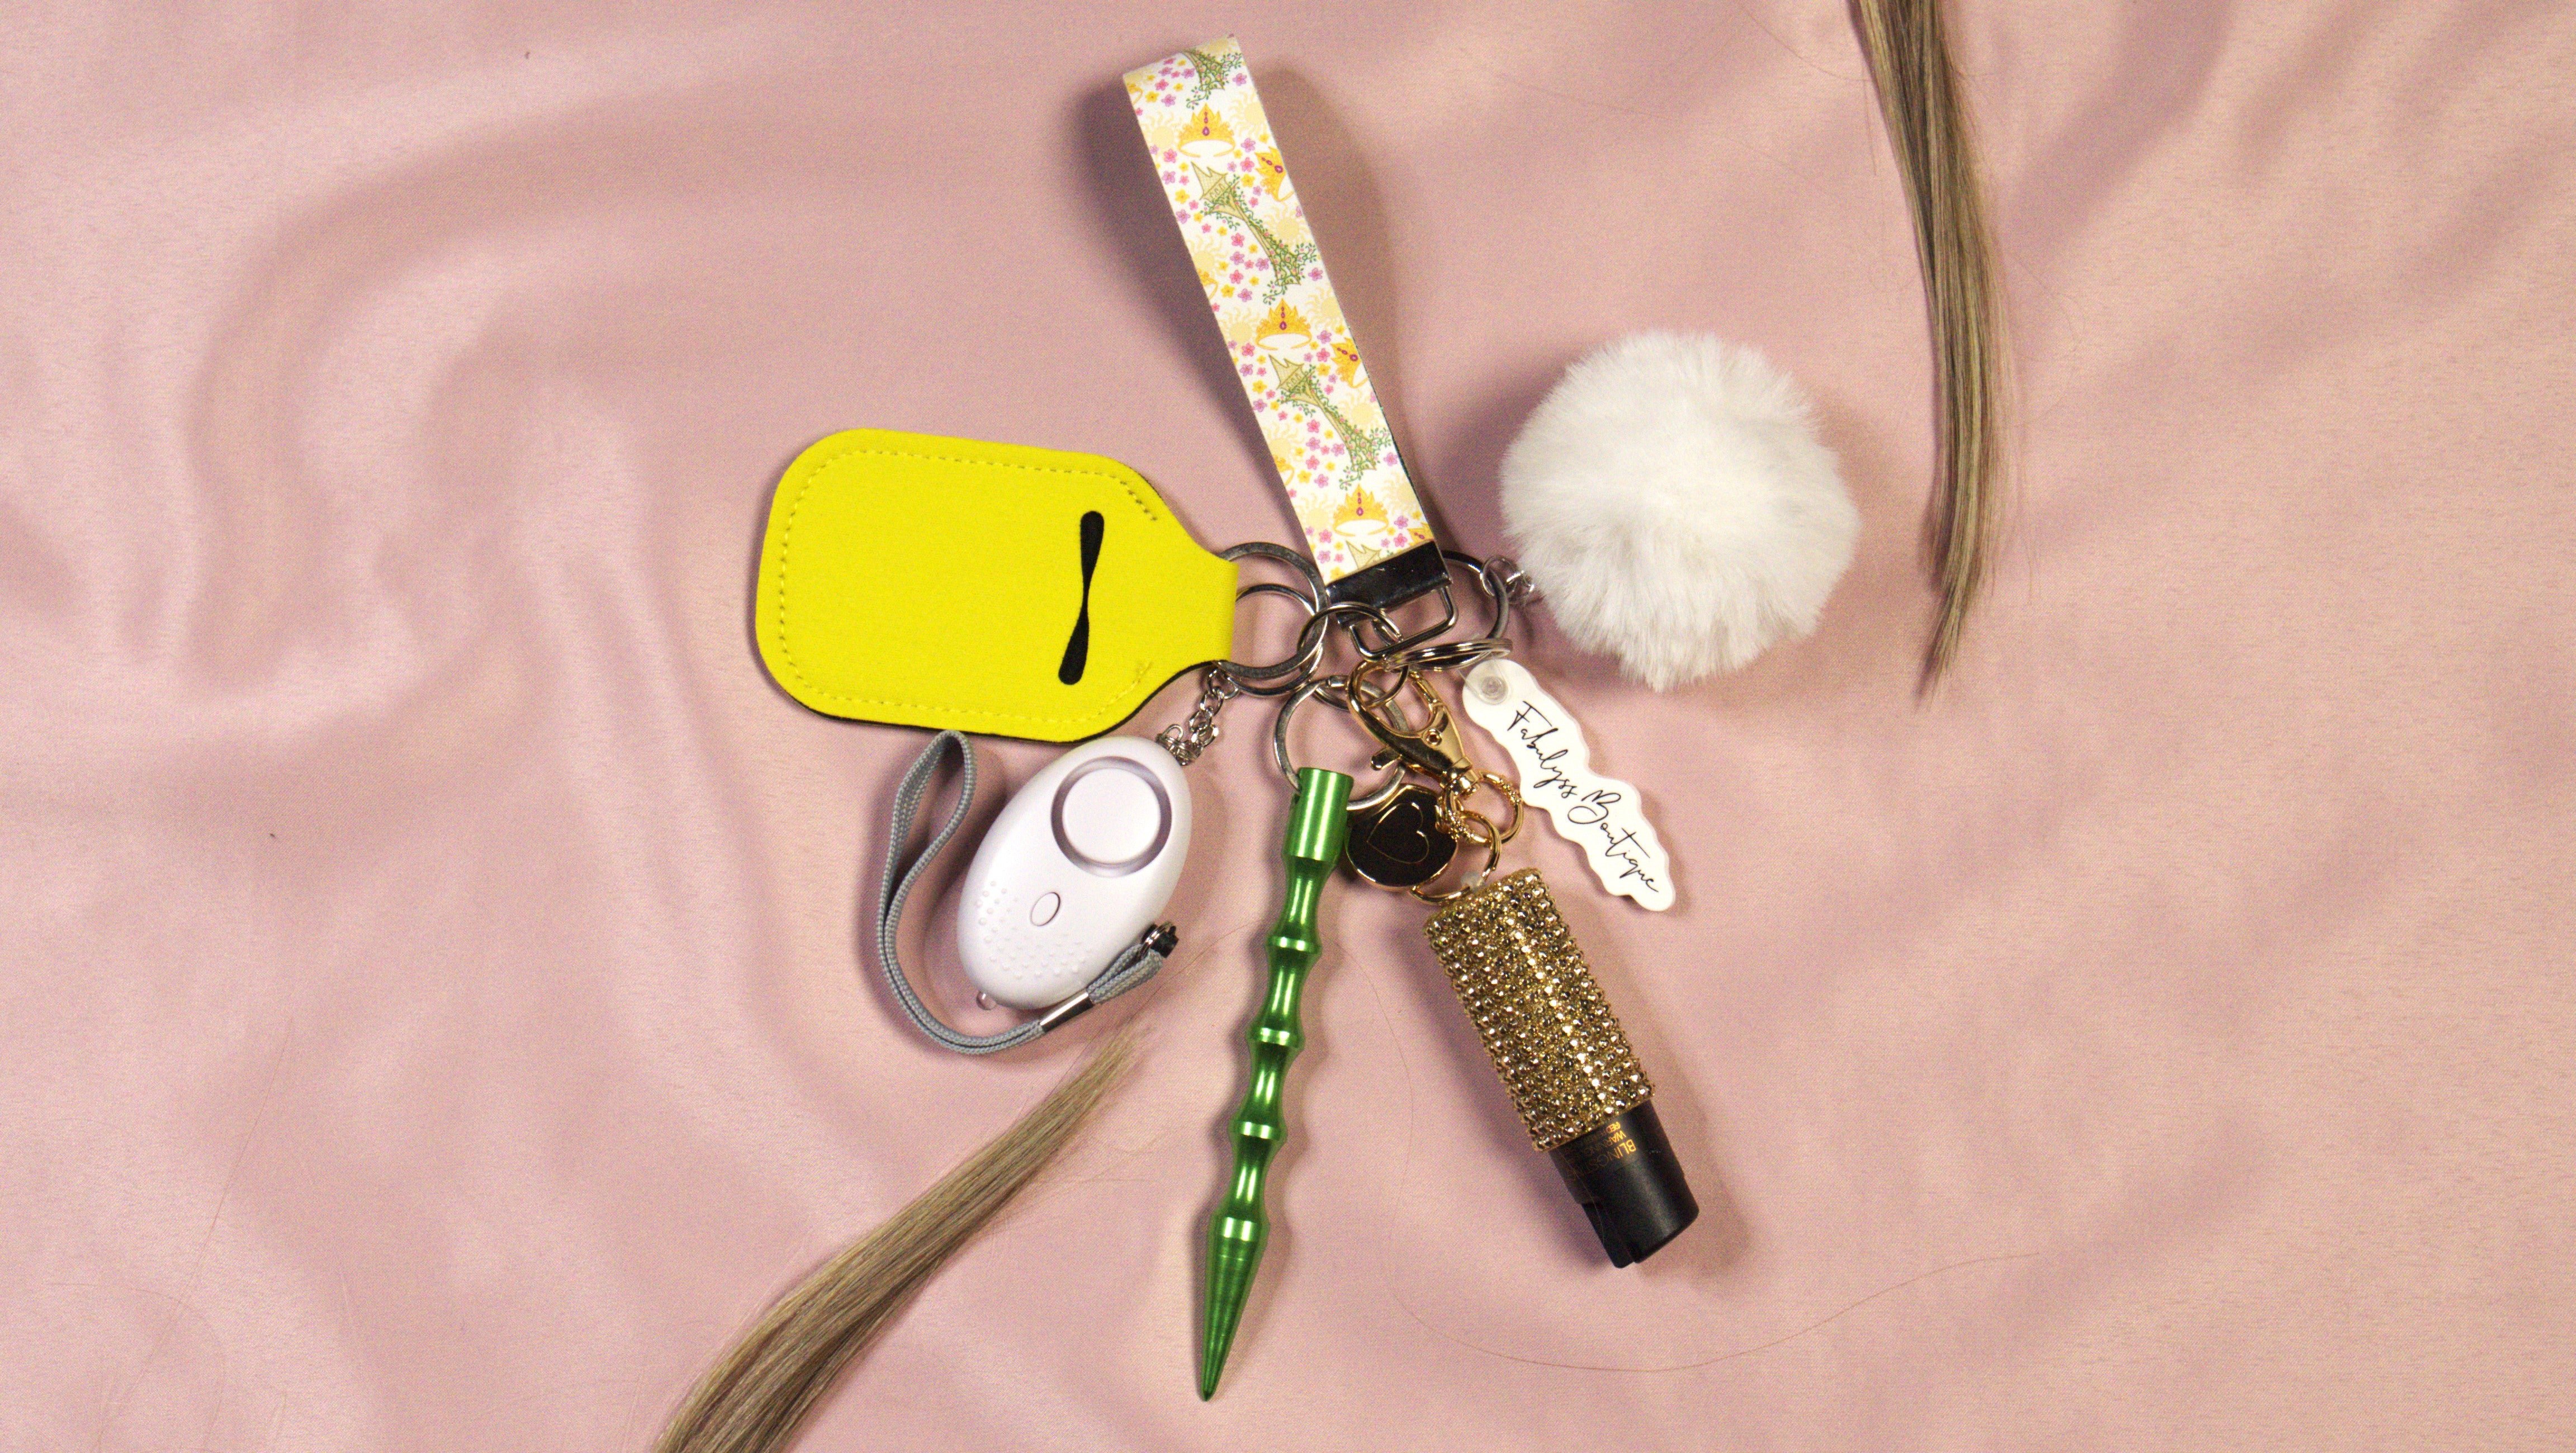 Let Down Your Hair Safety Keychain